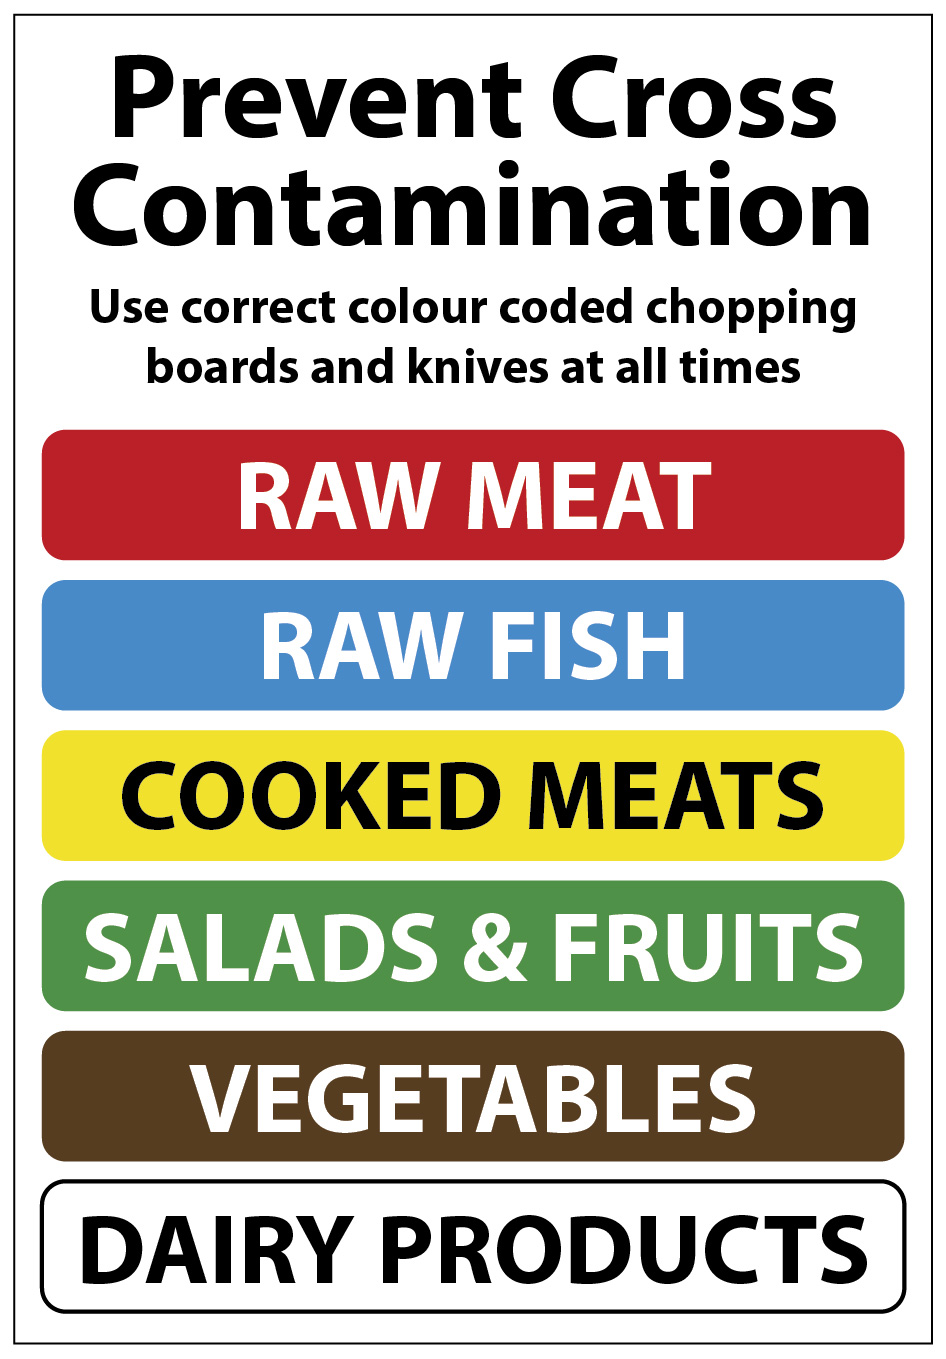 https://www.thehospitalityshop.co.uk/wp-content/uploads/2020/06/Prevent-Cross-Contamination.jpg